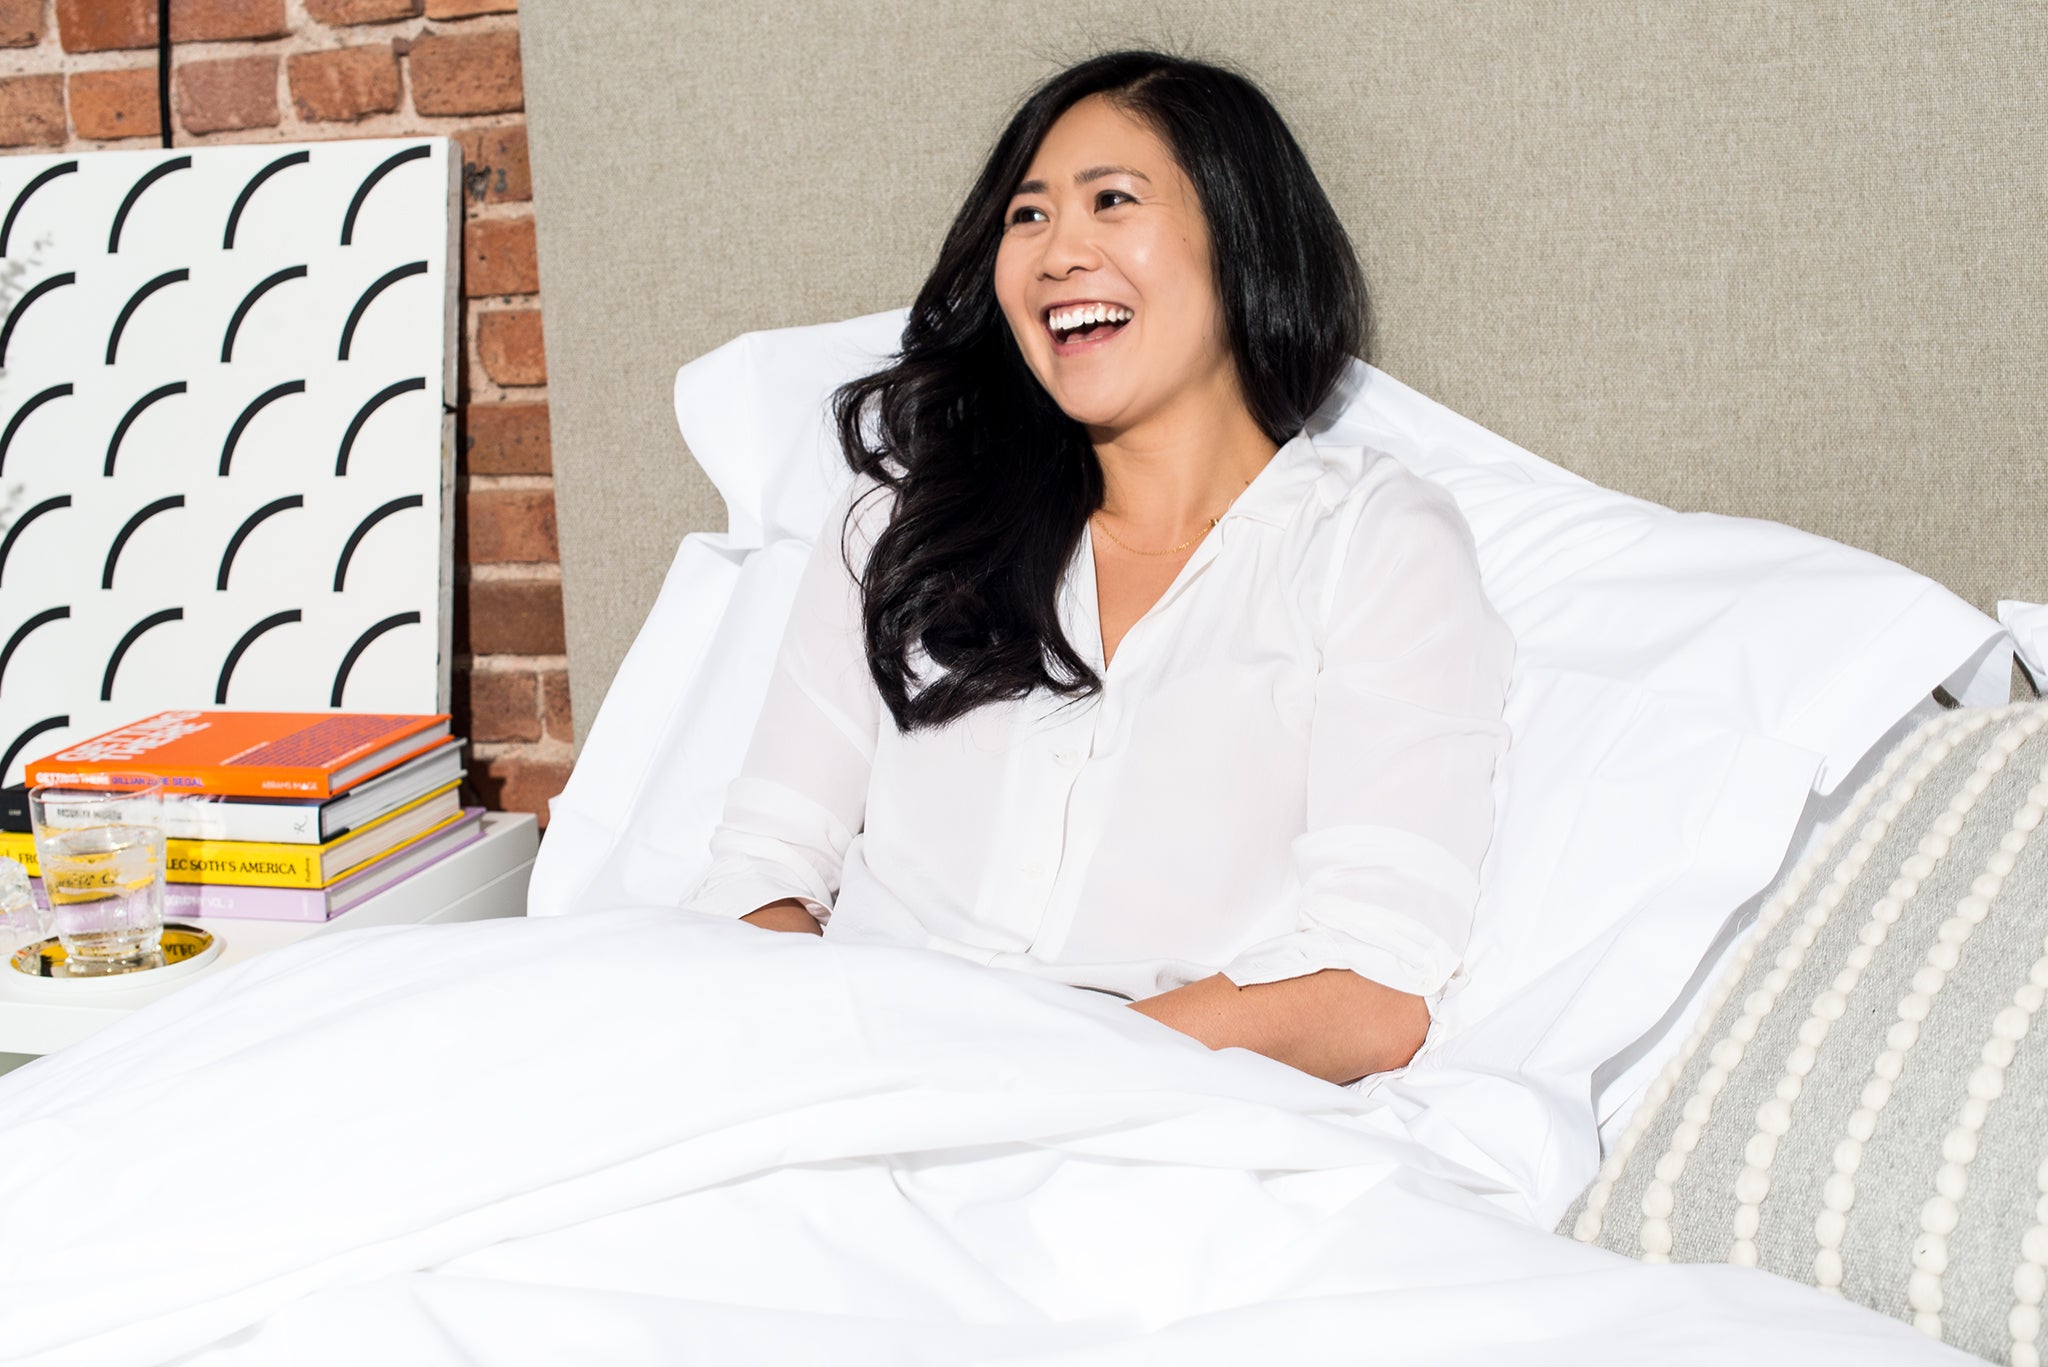 Every bedroom needs comfort and personality according to Tze. 